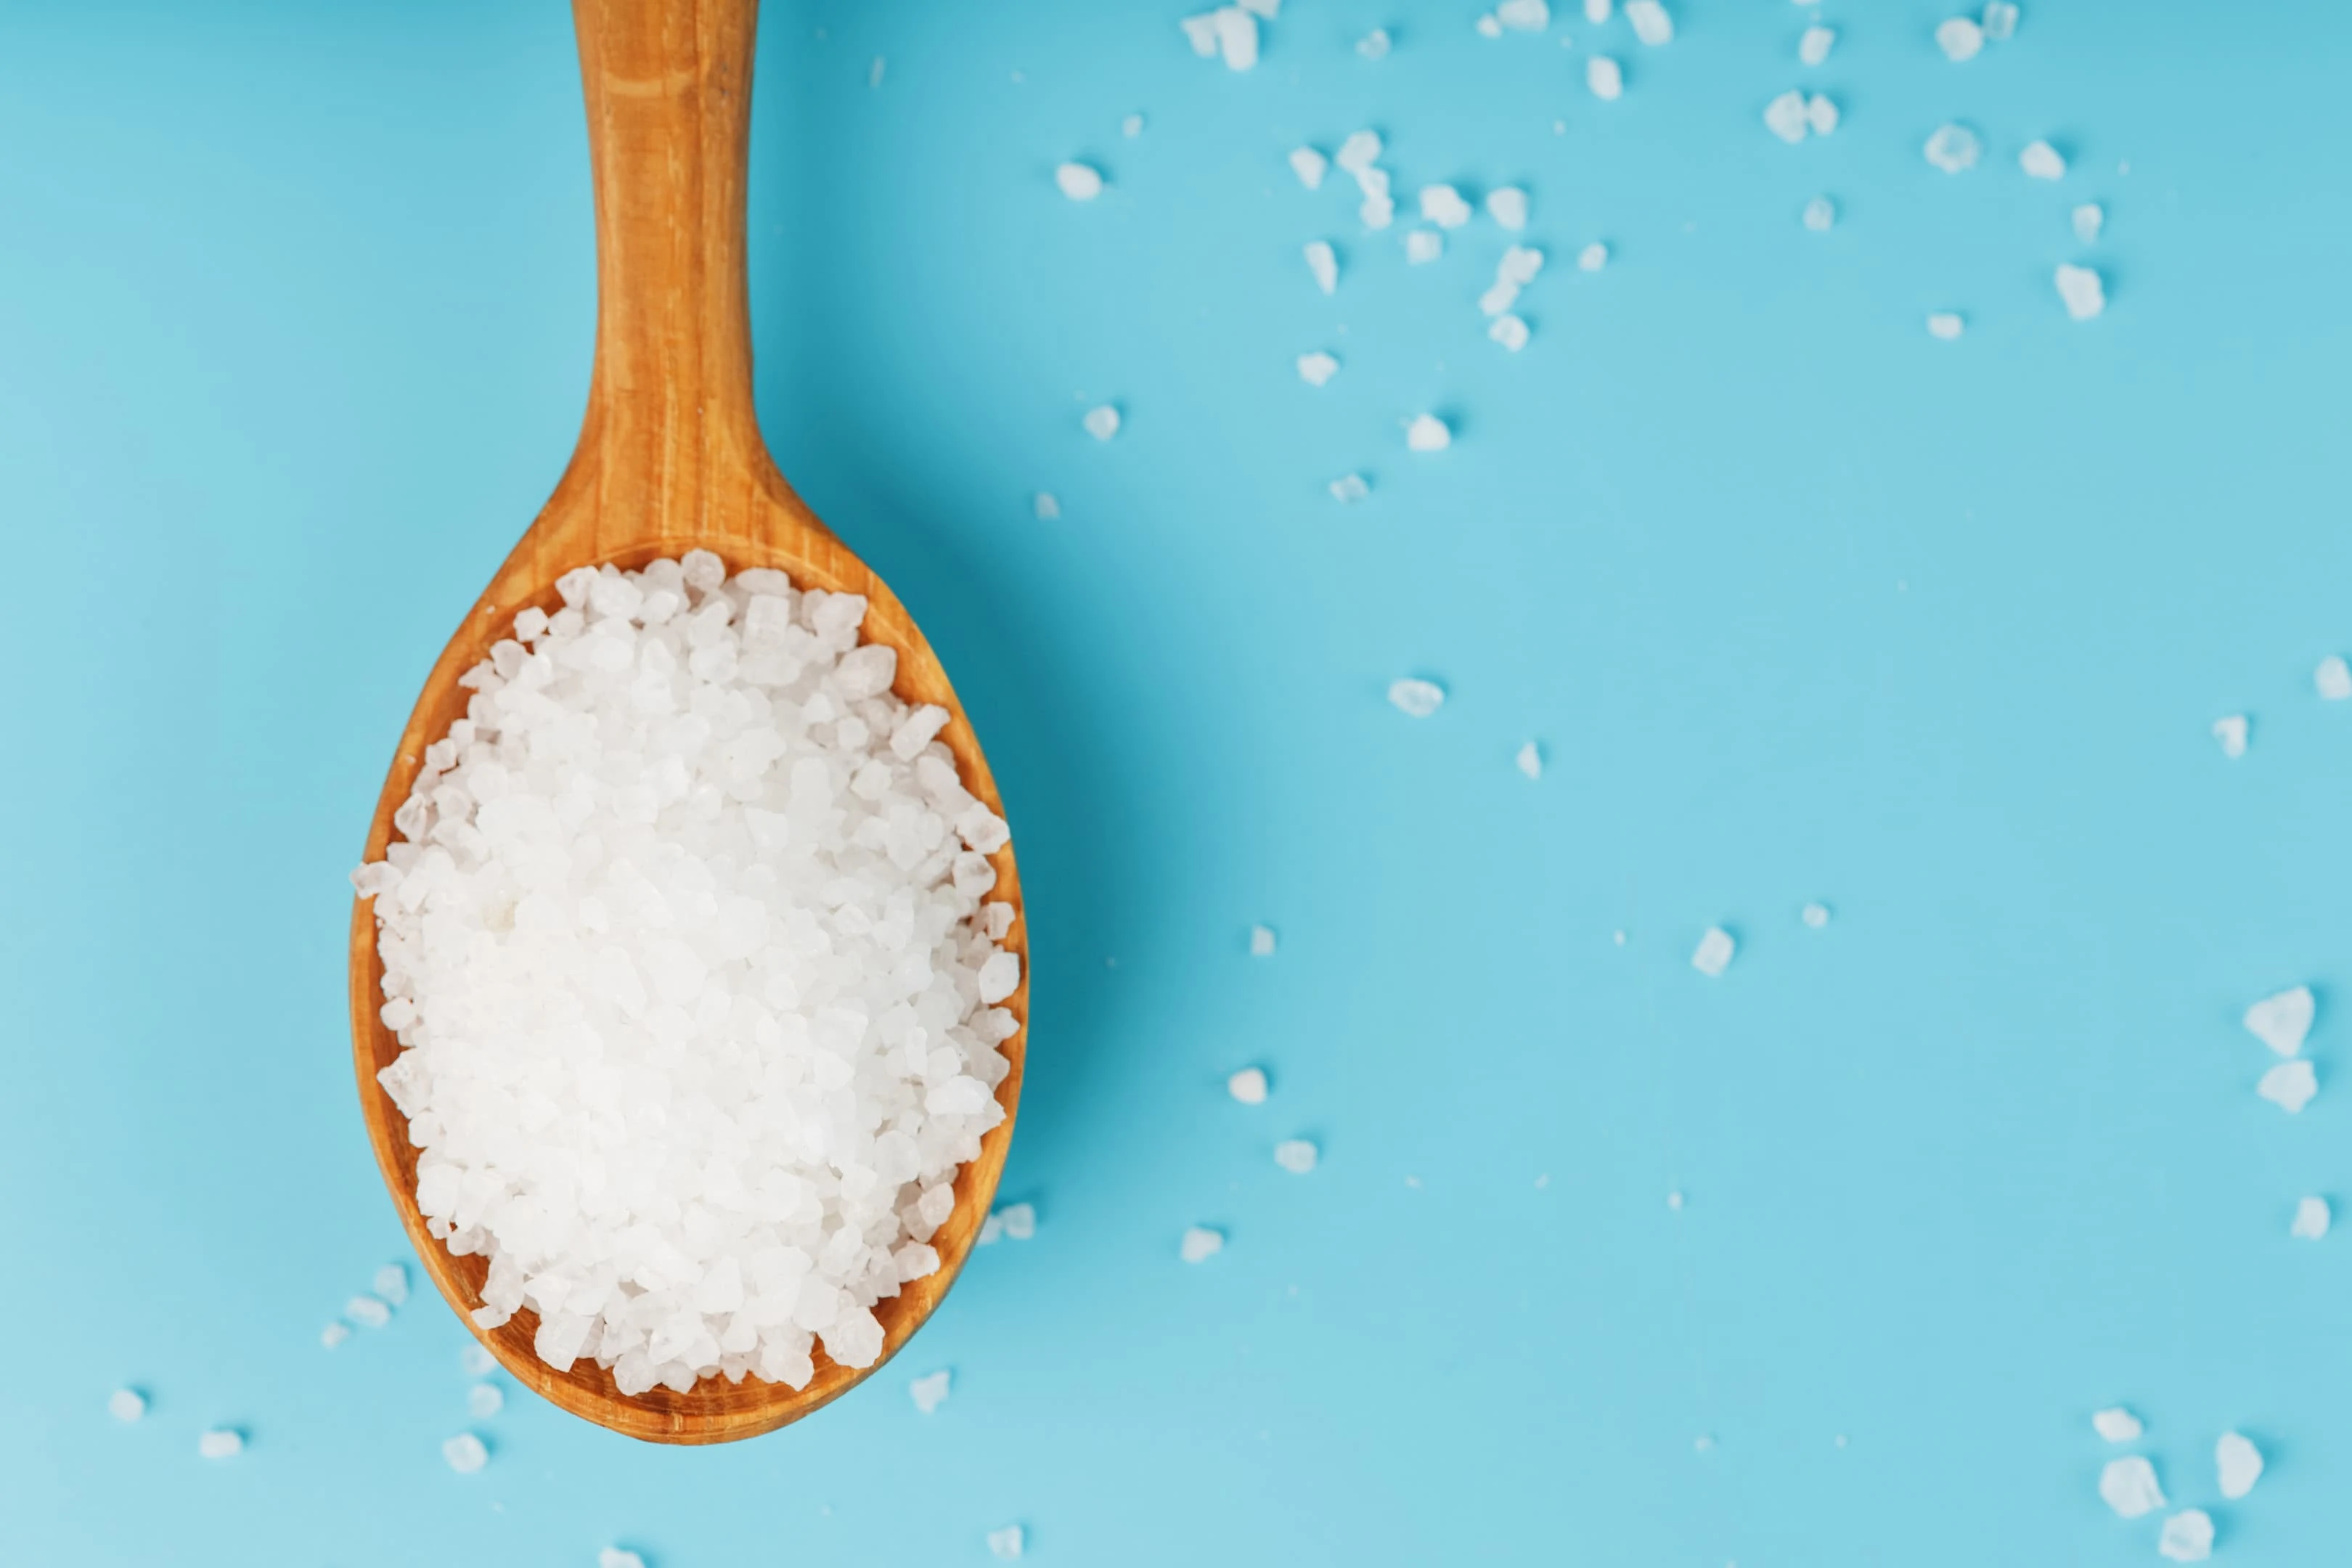 Calcium chloride large sea salt crystals on wooden spoon